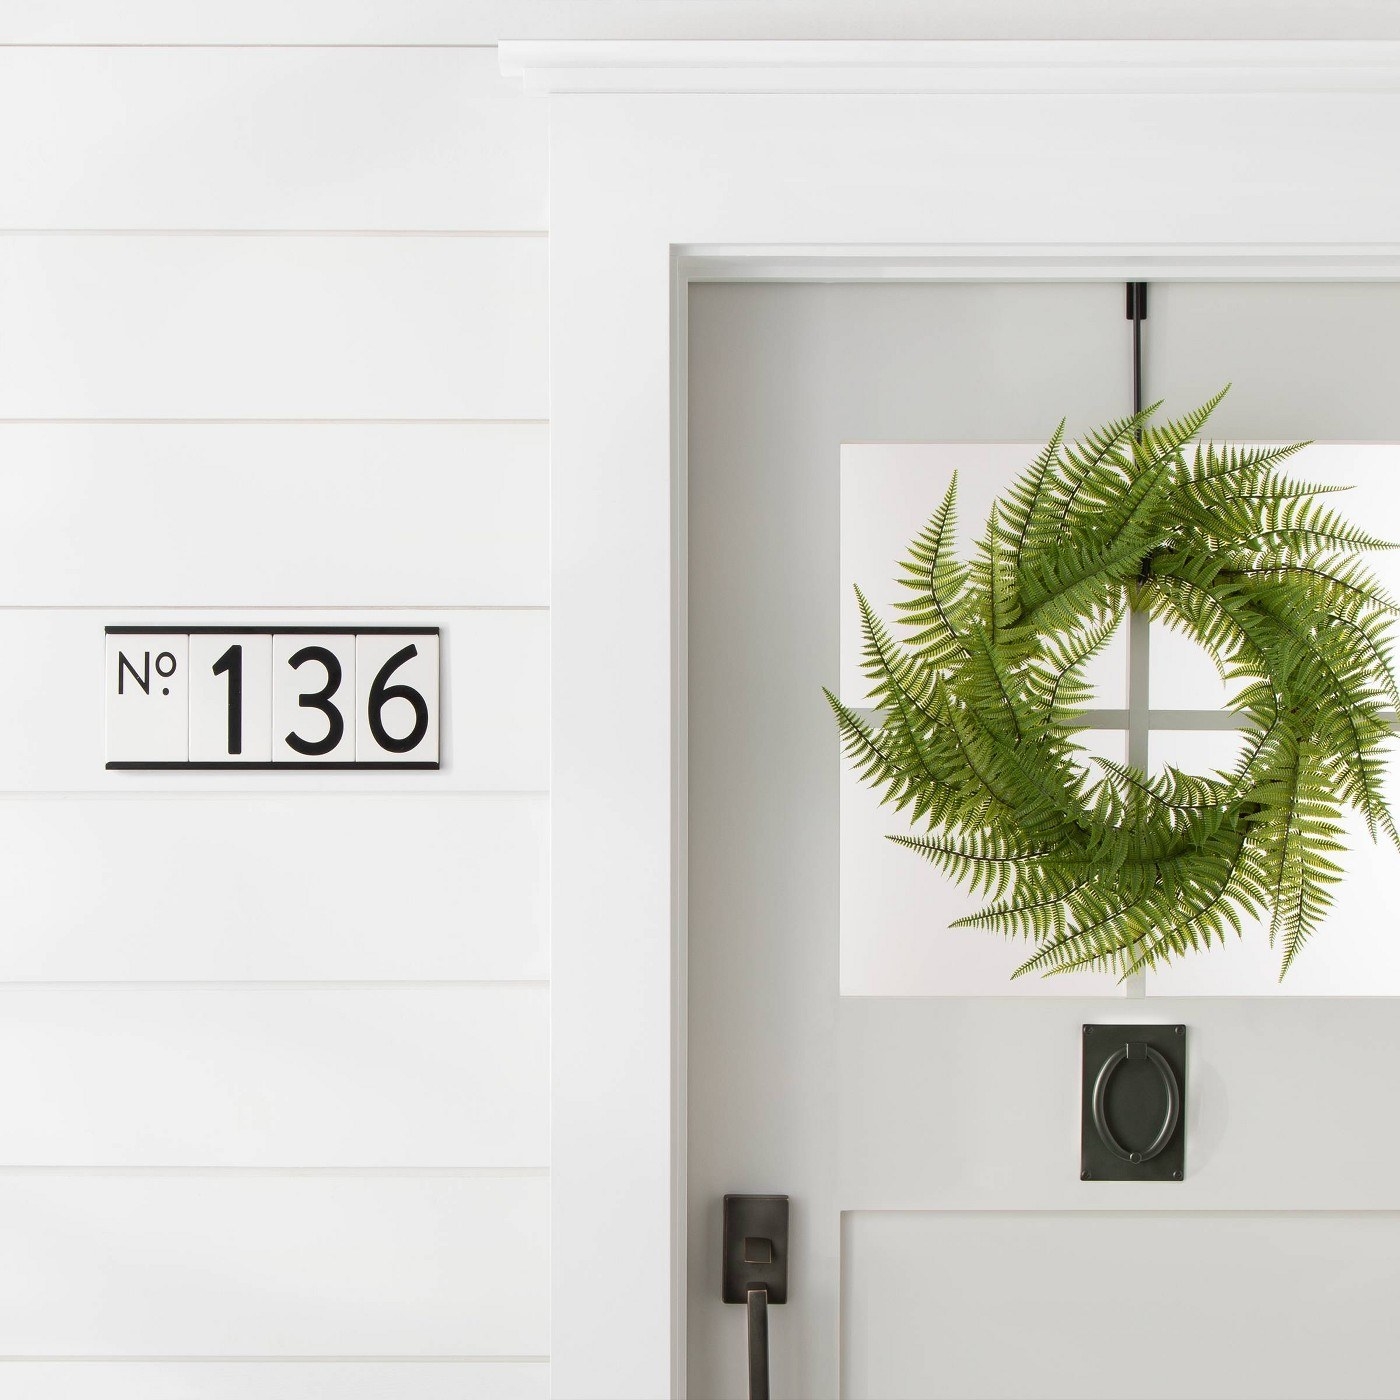 The farmhouse-style numbers set in the mounting plate (sold separately)